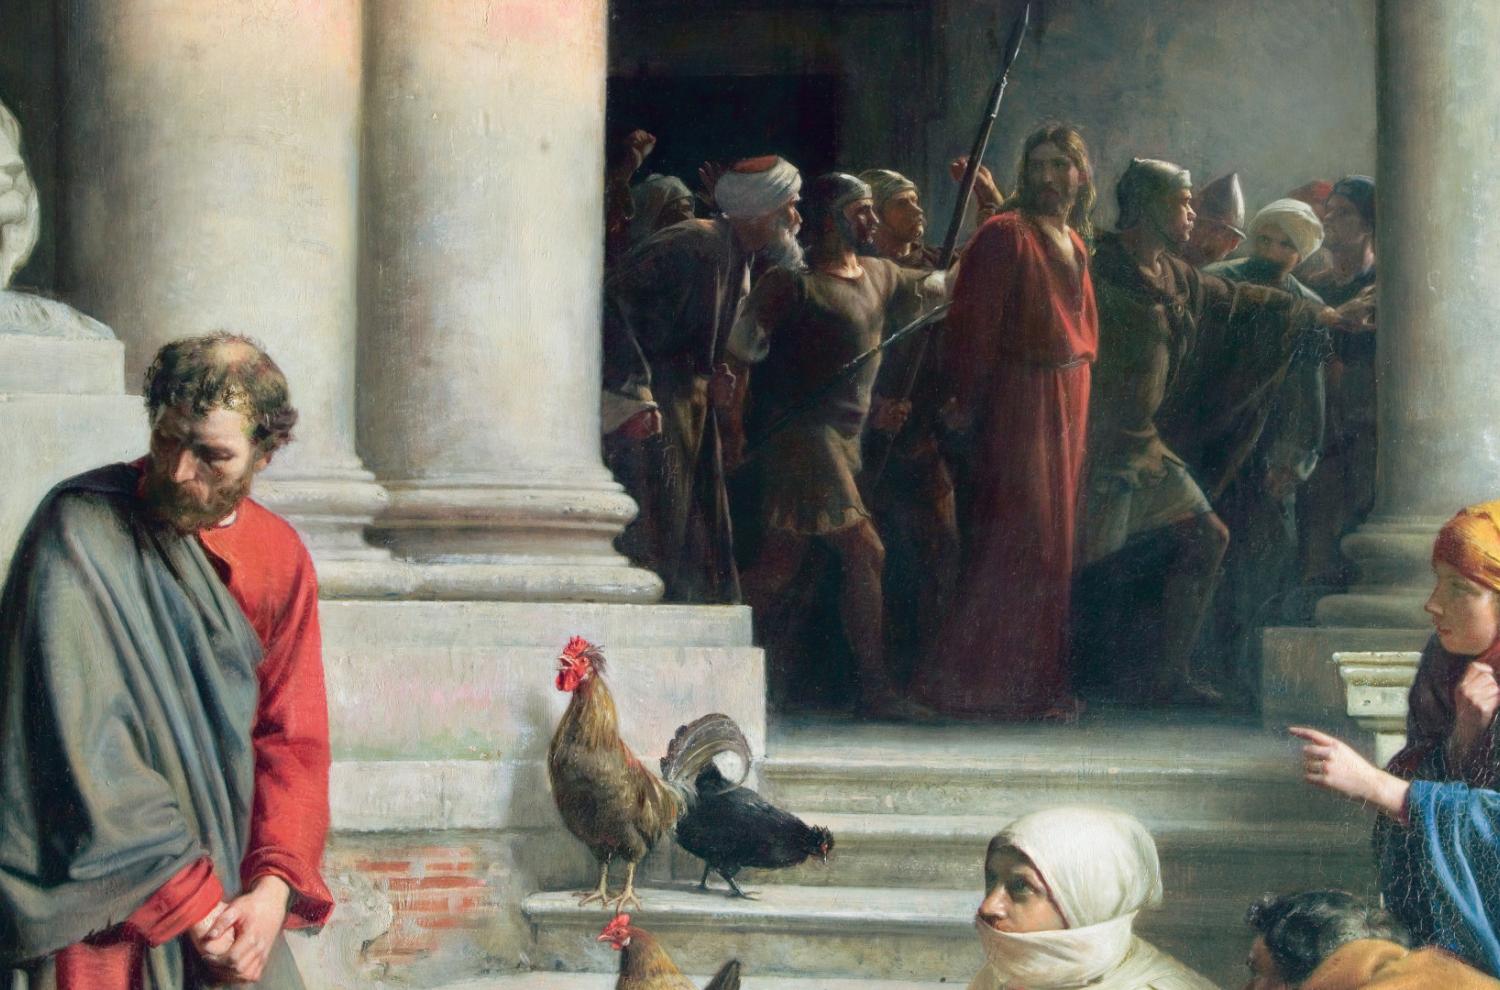 Peter looks away as Christ passes by in the hands of his accusers in this painting by Carl Bloch, "Peter's Denial."